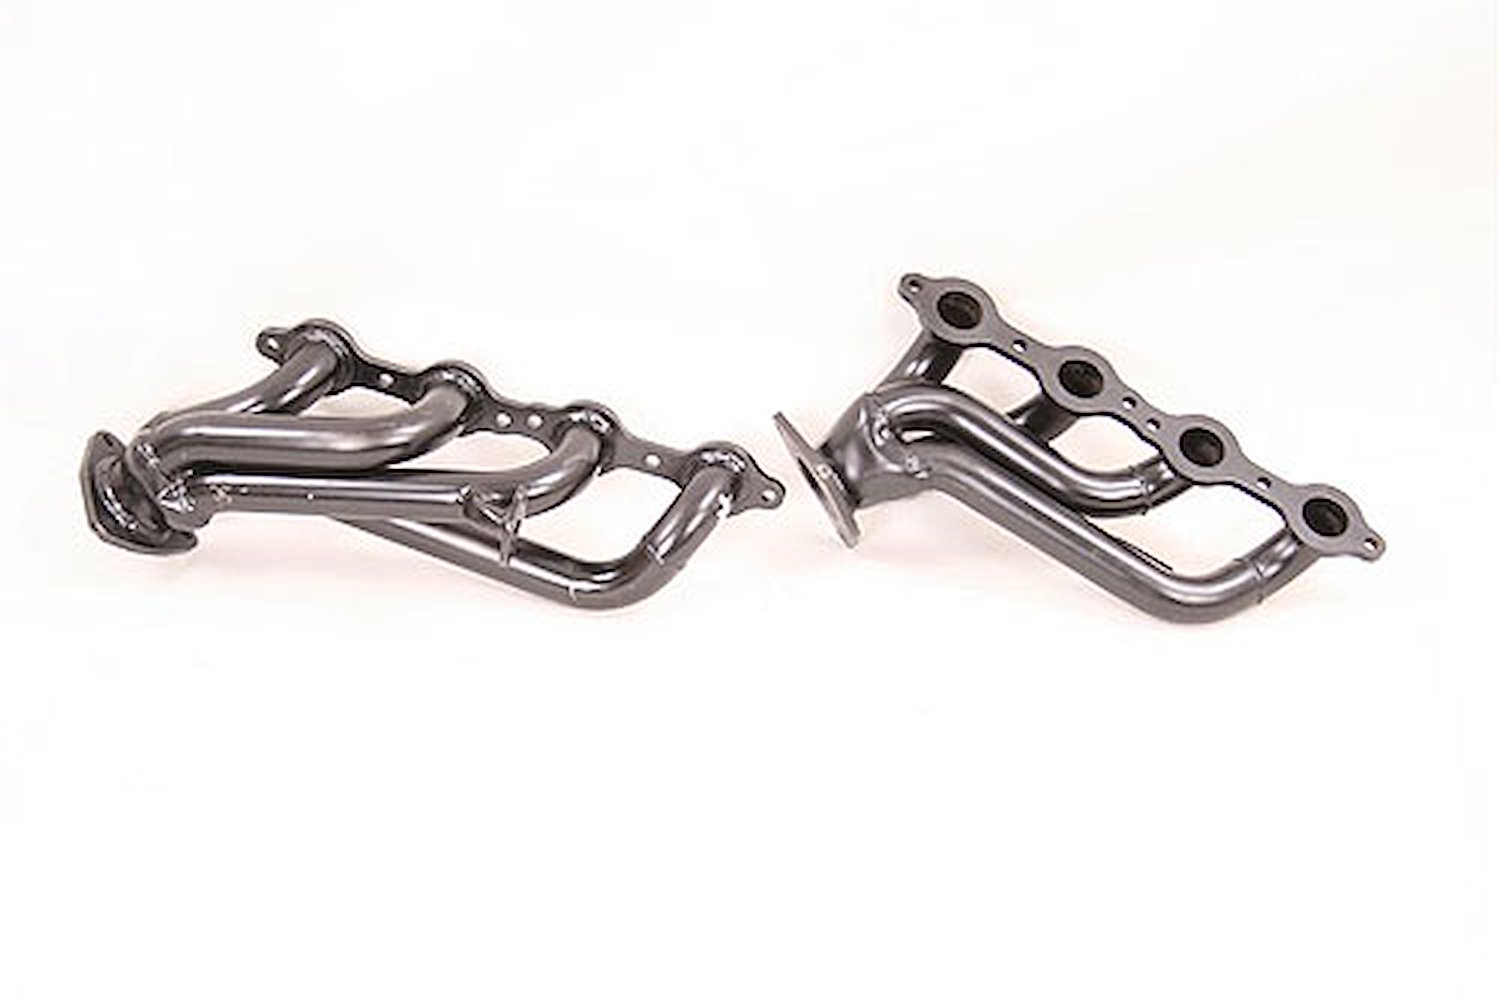 Painted Truck Headers 1999-2006 Chevy/GMC 1500/2500 2WD/4WD 4.8L/5.3L